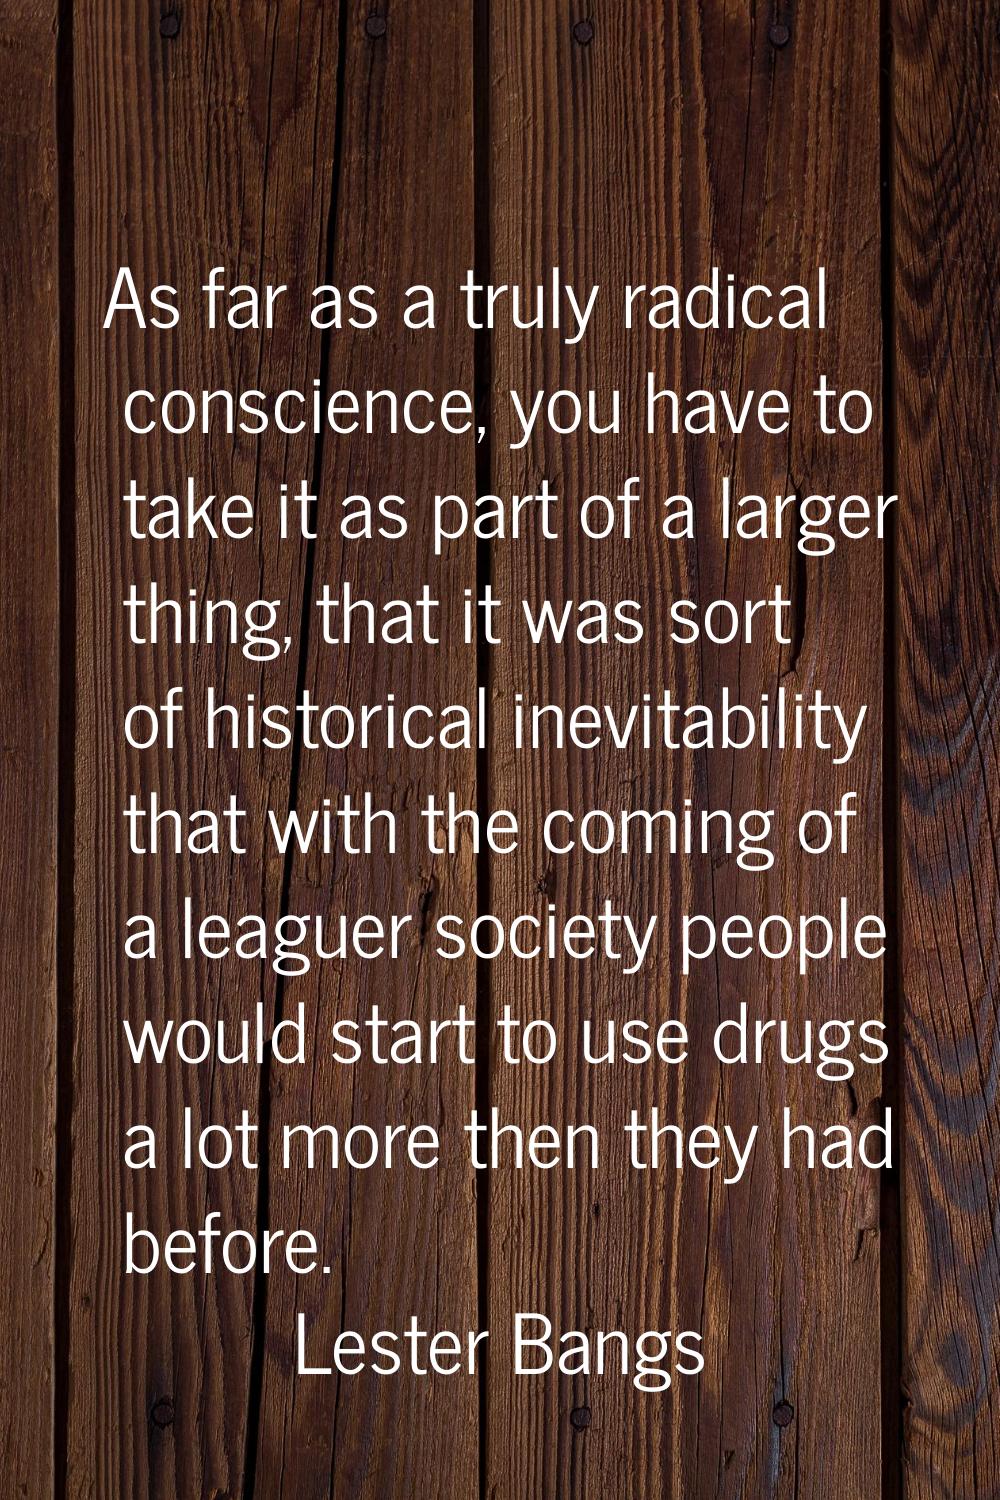 As far as a truly radical conscience, you have to take it as part of a larger thing, that it was so